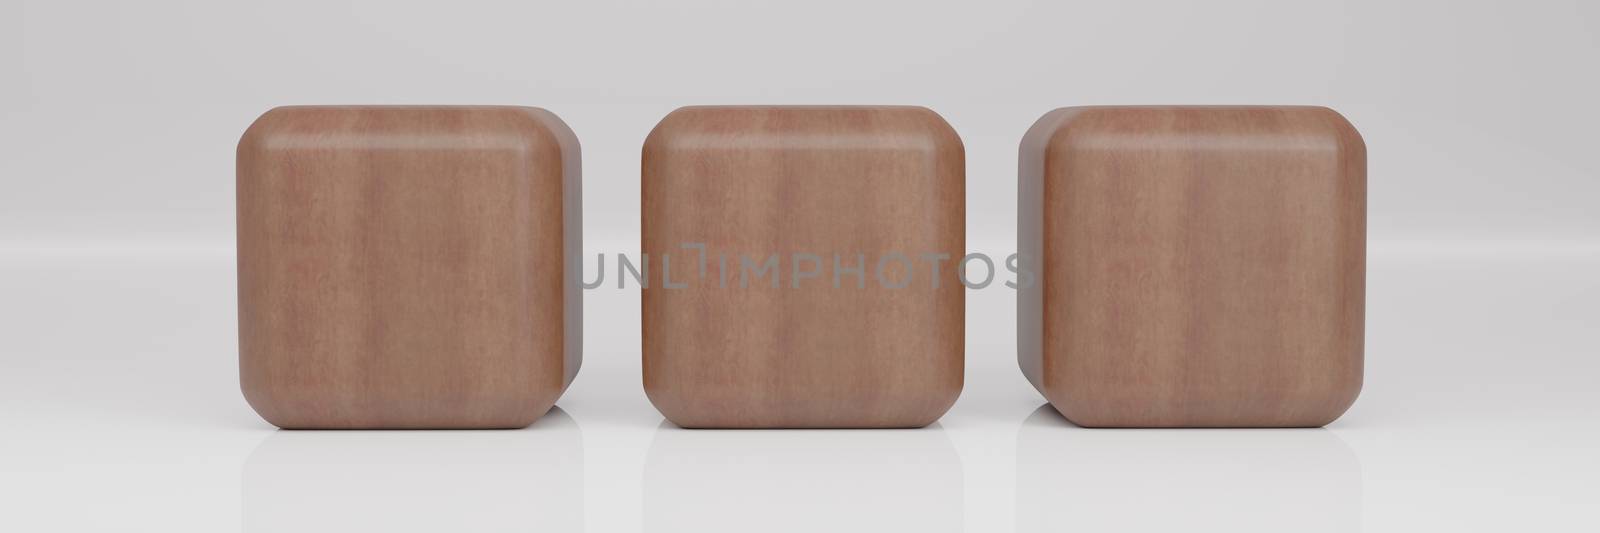 Wooden Rounded cube 3 Perspective on white background wiht Reflection. Geometric shape. 3D Rendering